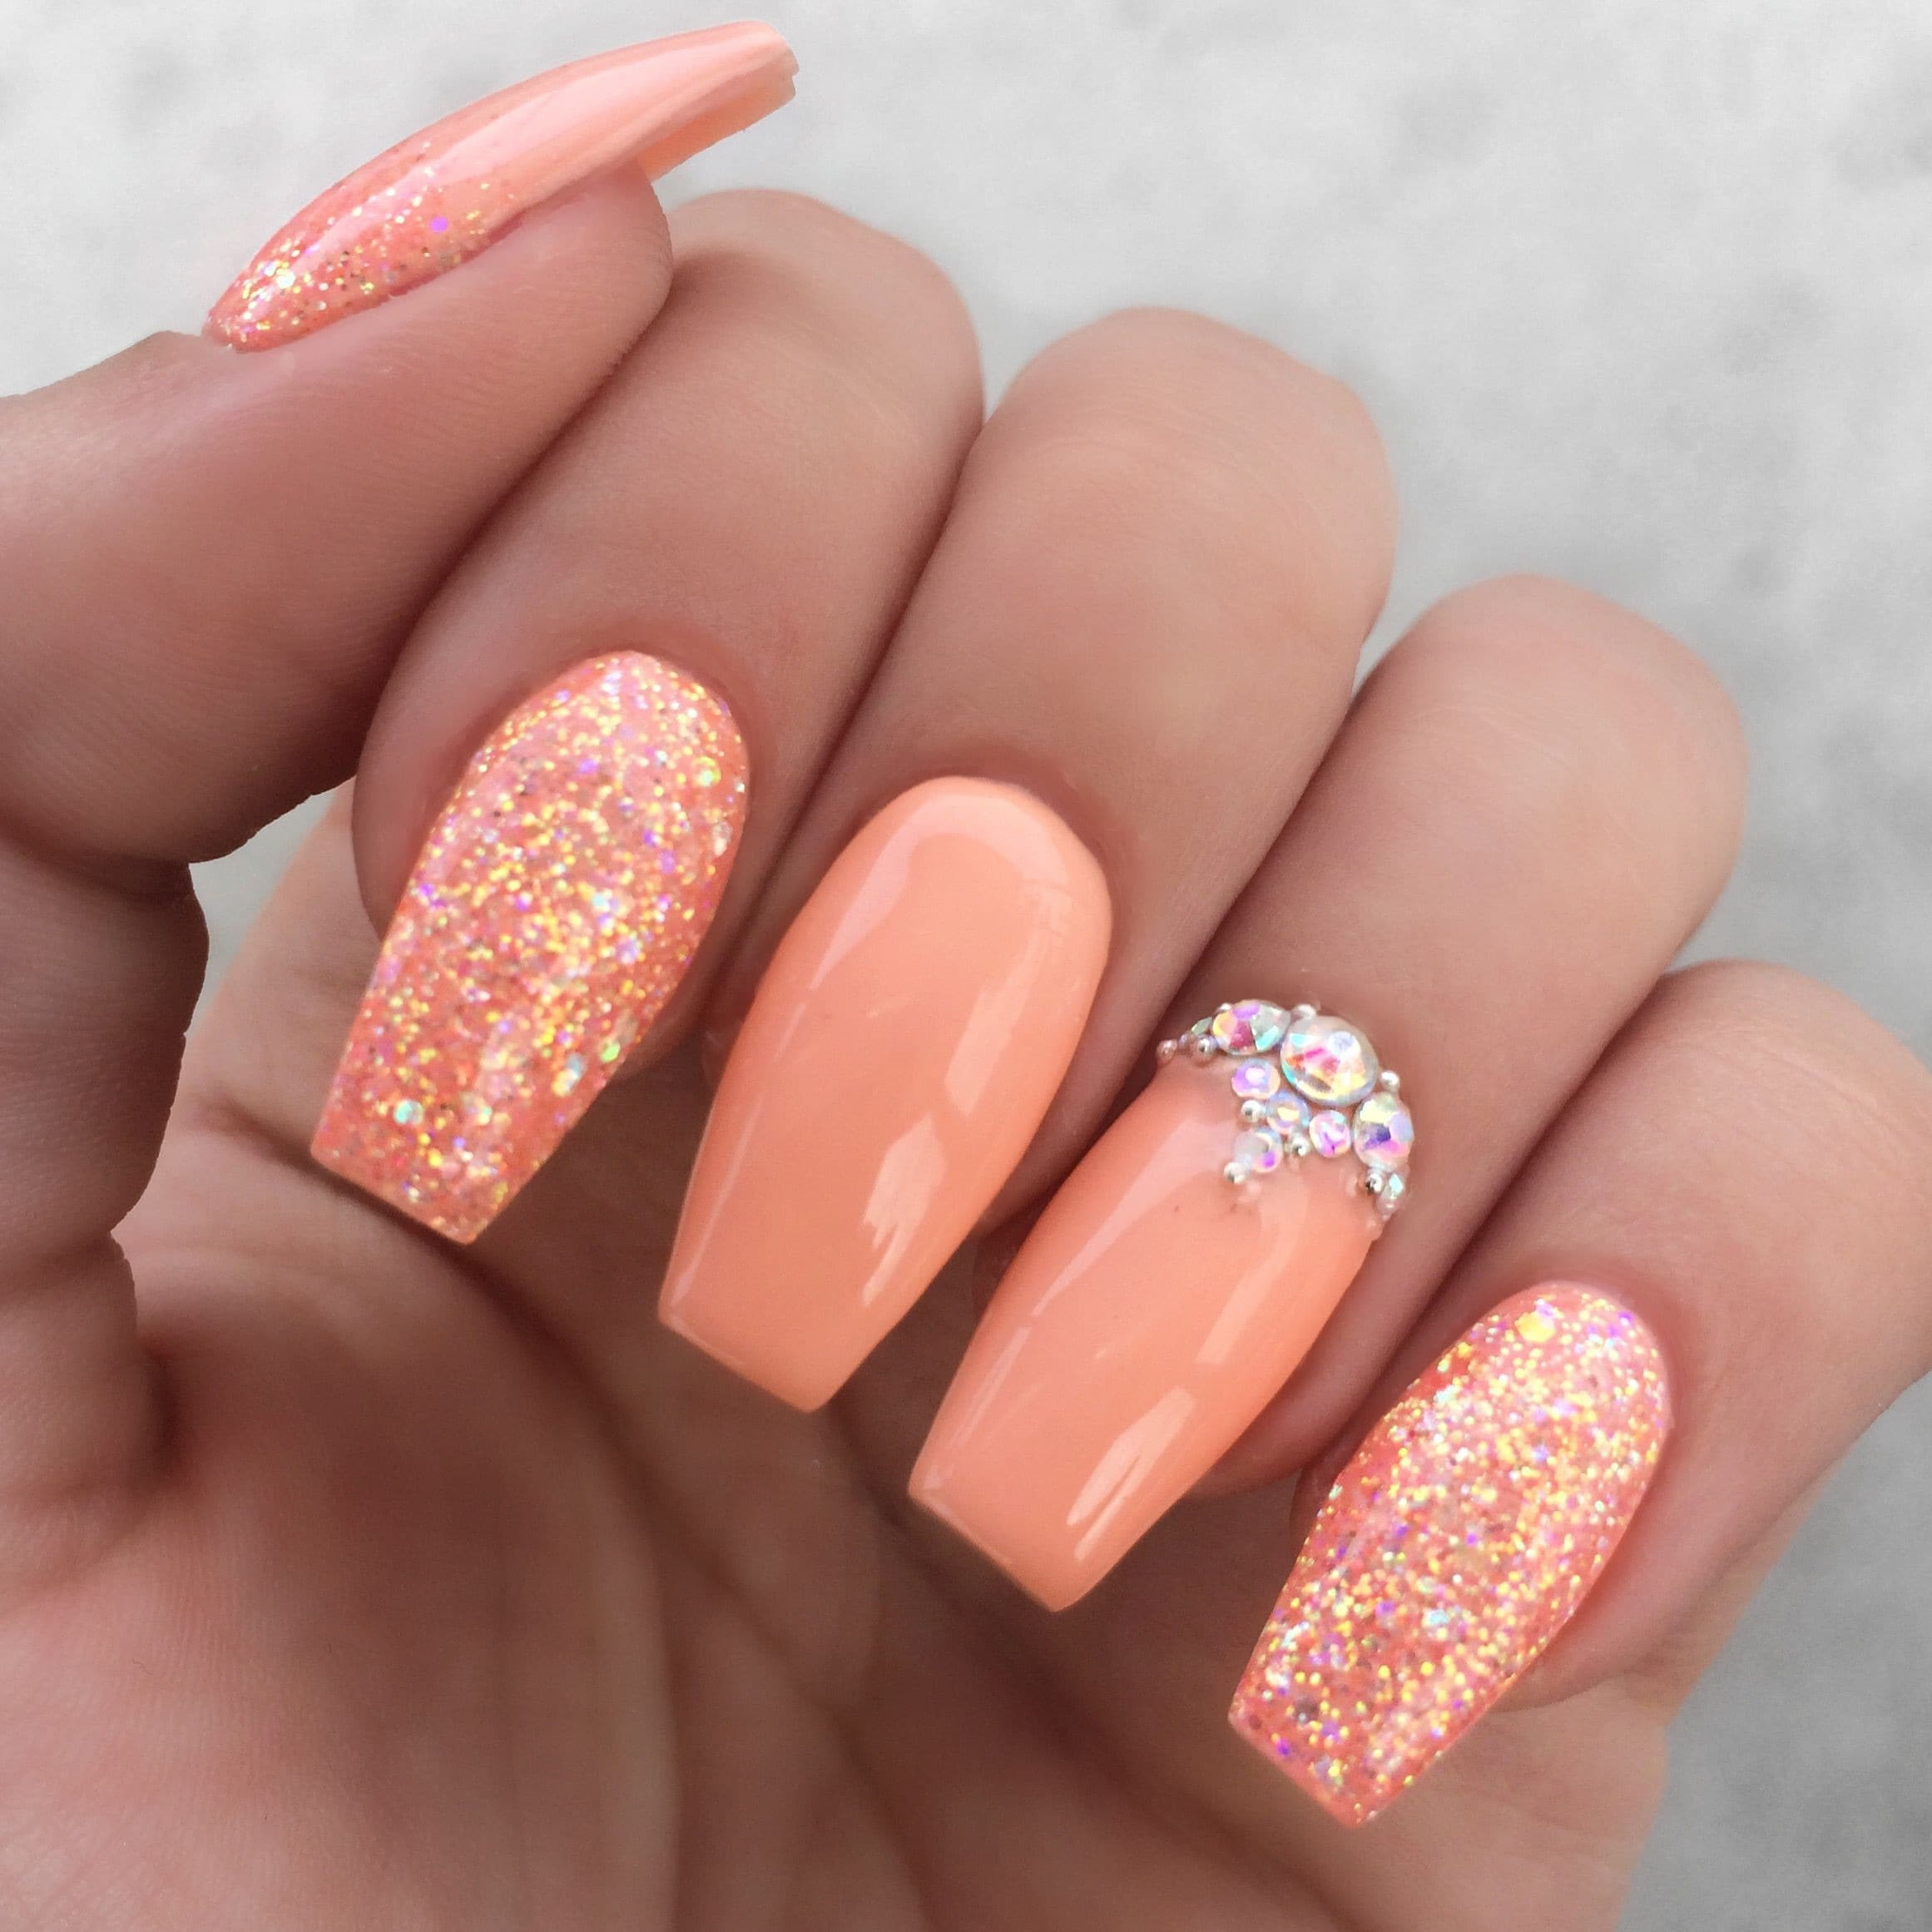 Nail Designs With Rhinestones And Glitter
 7 Elegant Acrylic Nail Designs Rhinestones ⋆ Fitnailslover